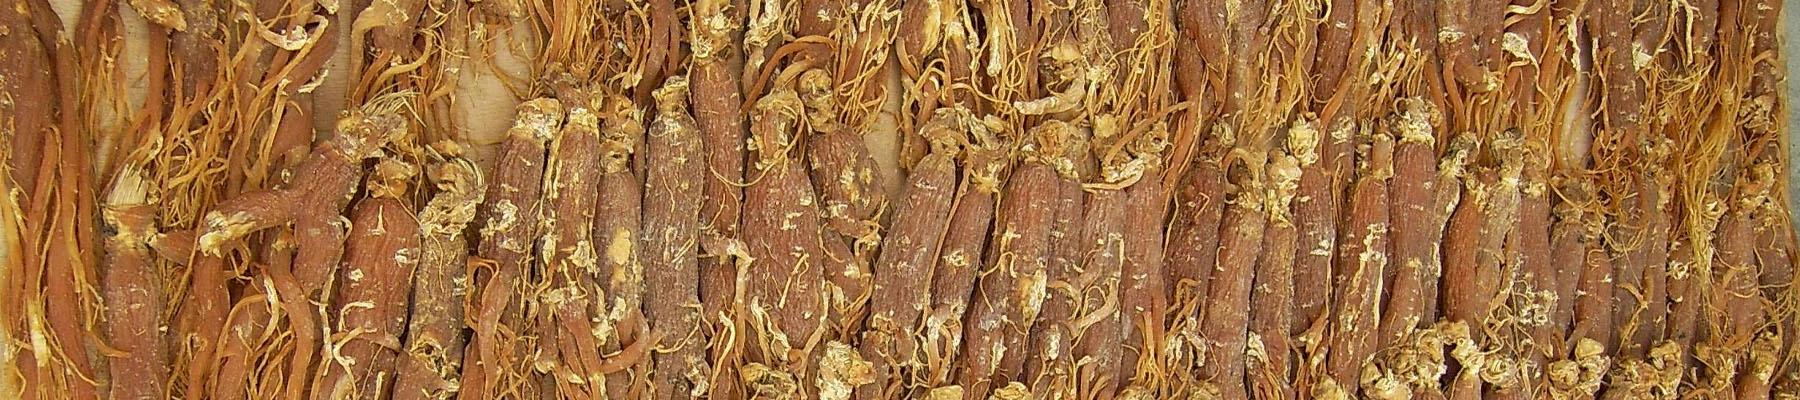 Panax ginseng root, one of the species in officially recommended COVID-19 treatments